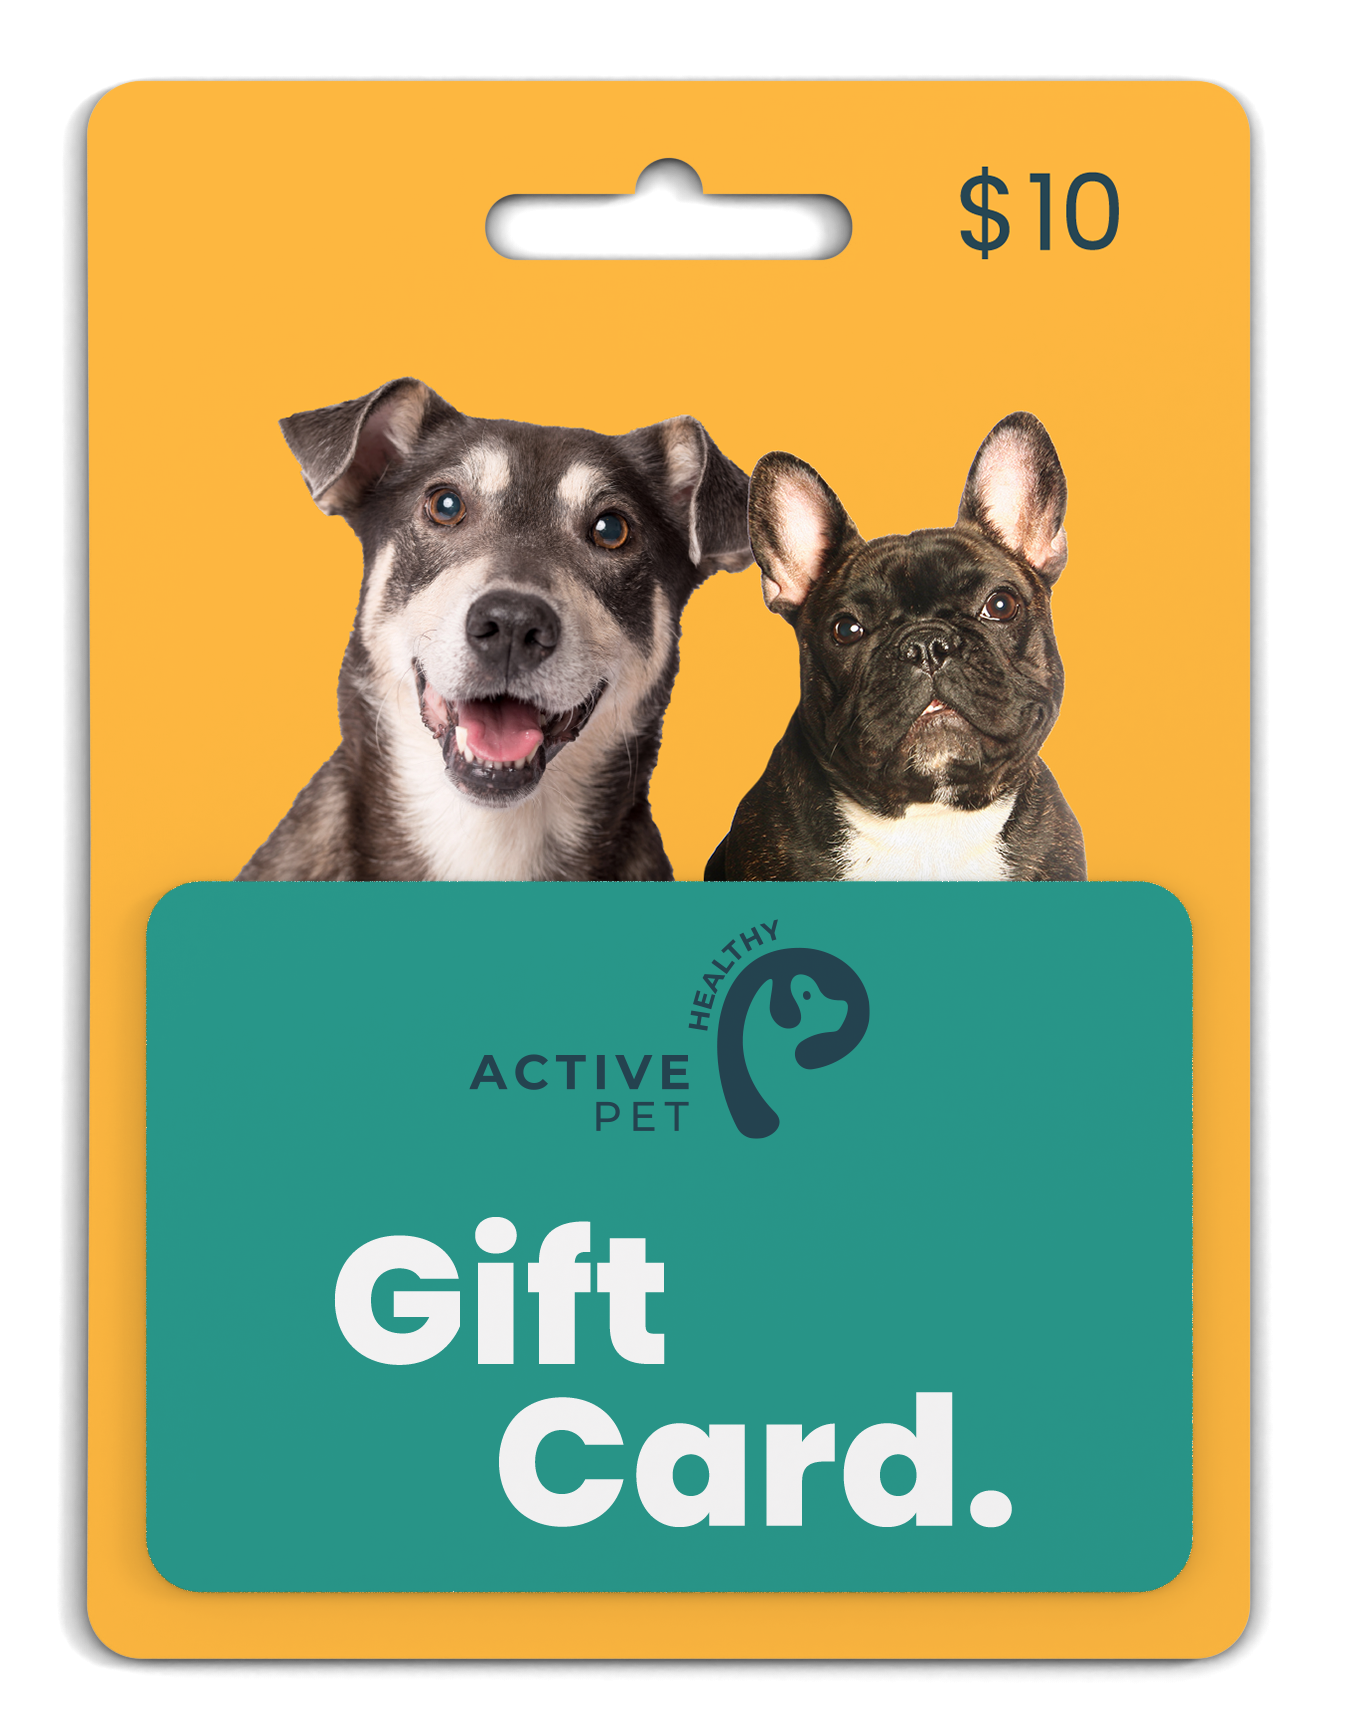 Healthy Active Pet $10 Gift Card